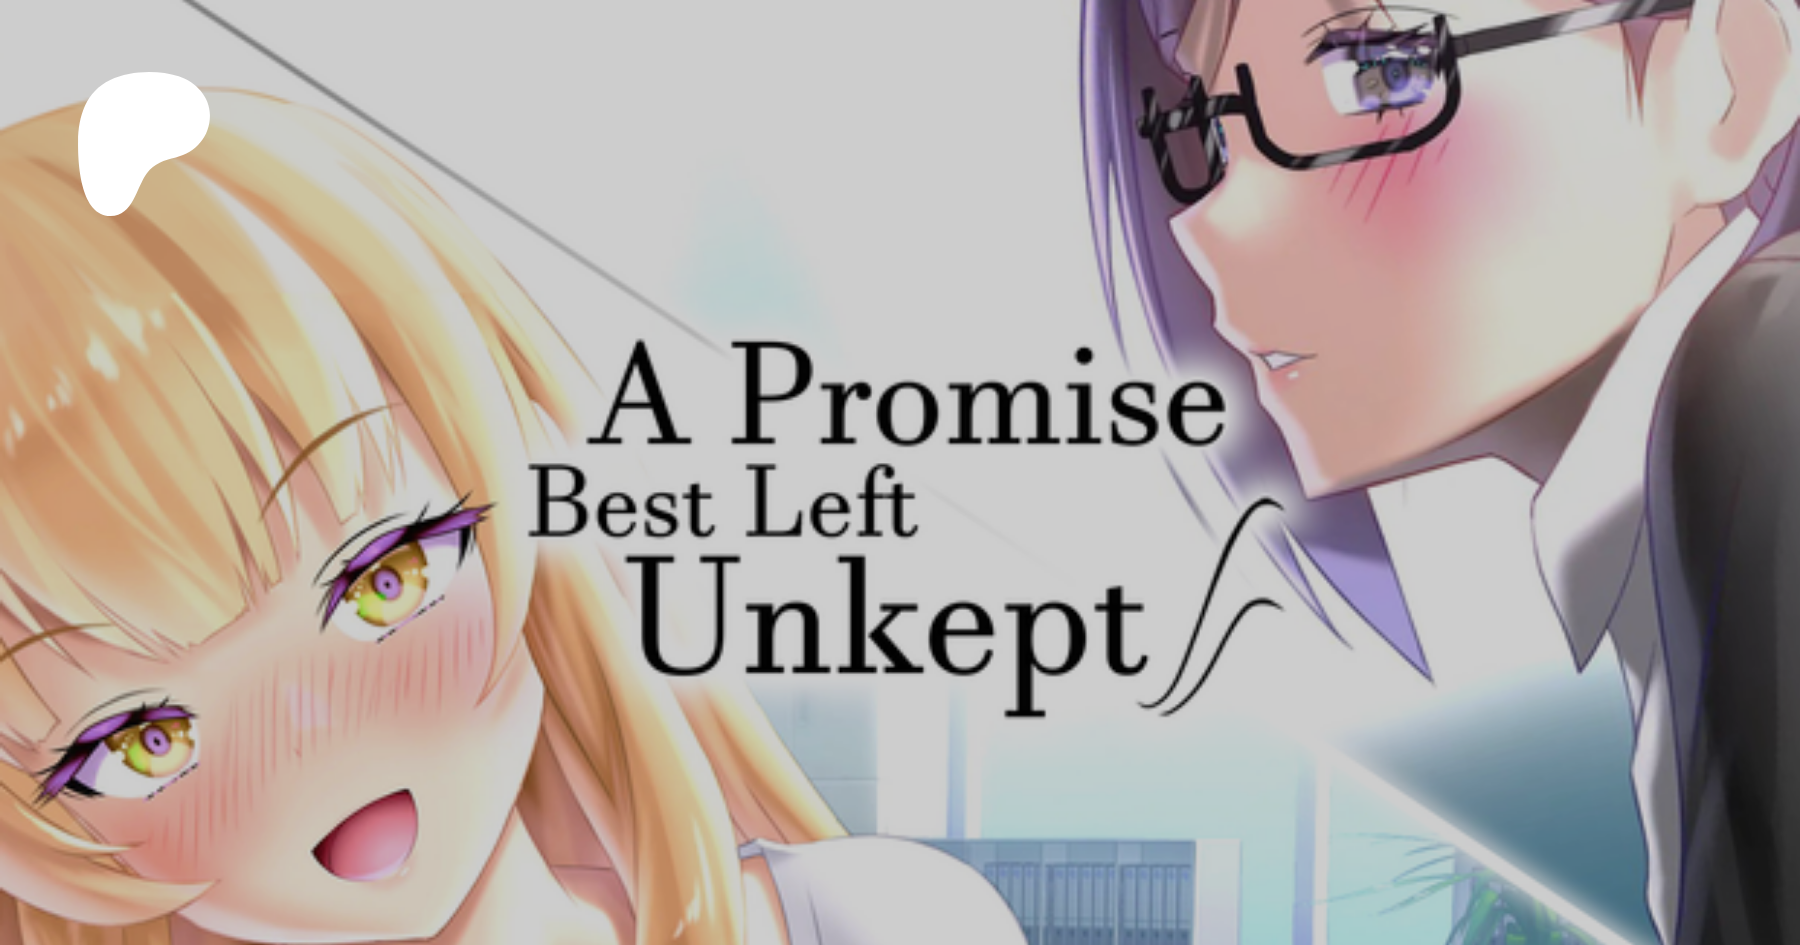 Pre-order A Promise Best Left Unkept on our Store now! | Patreon